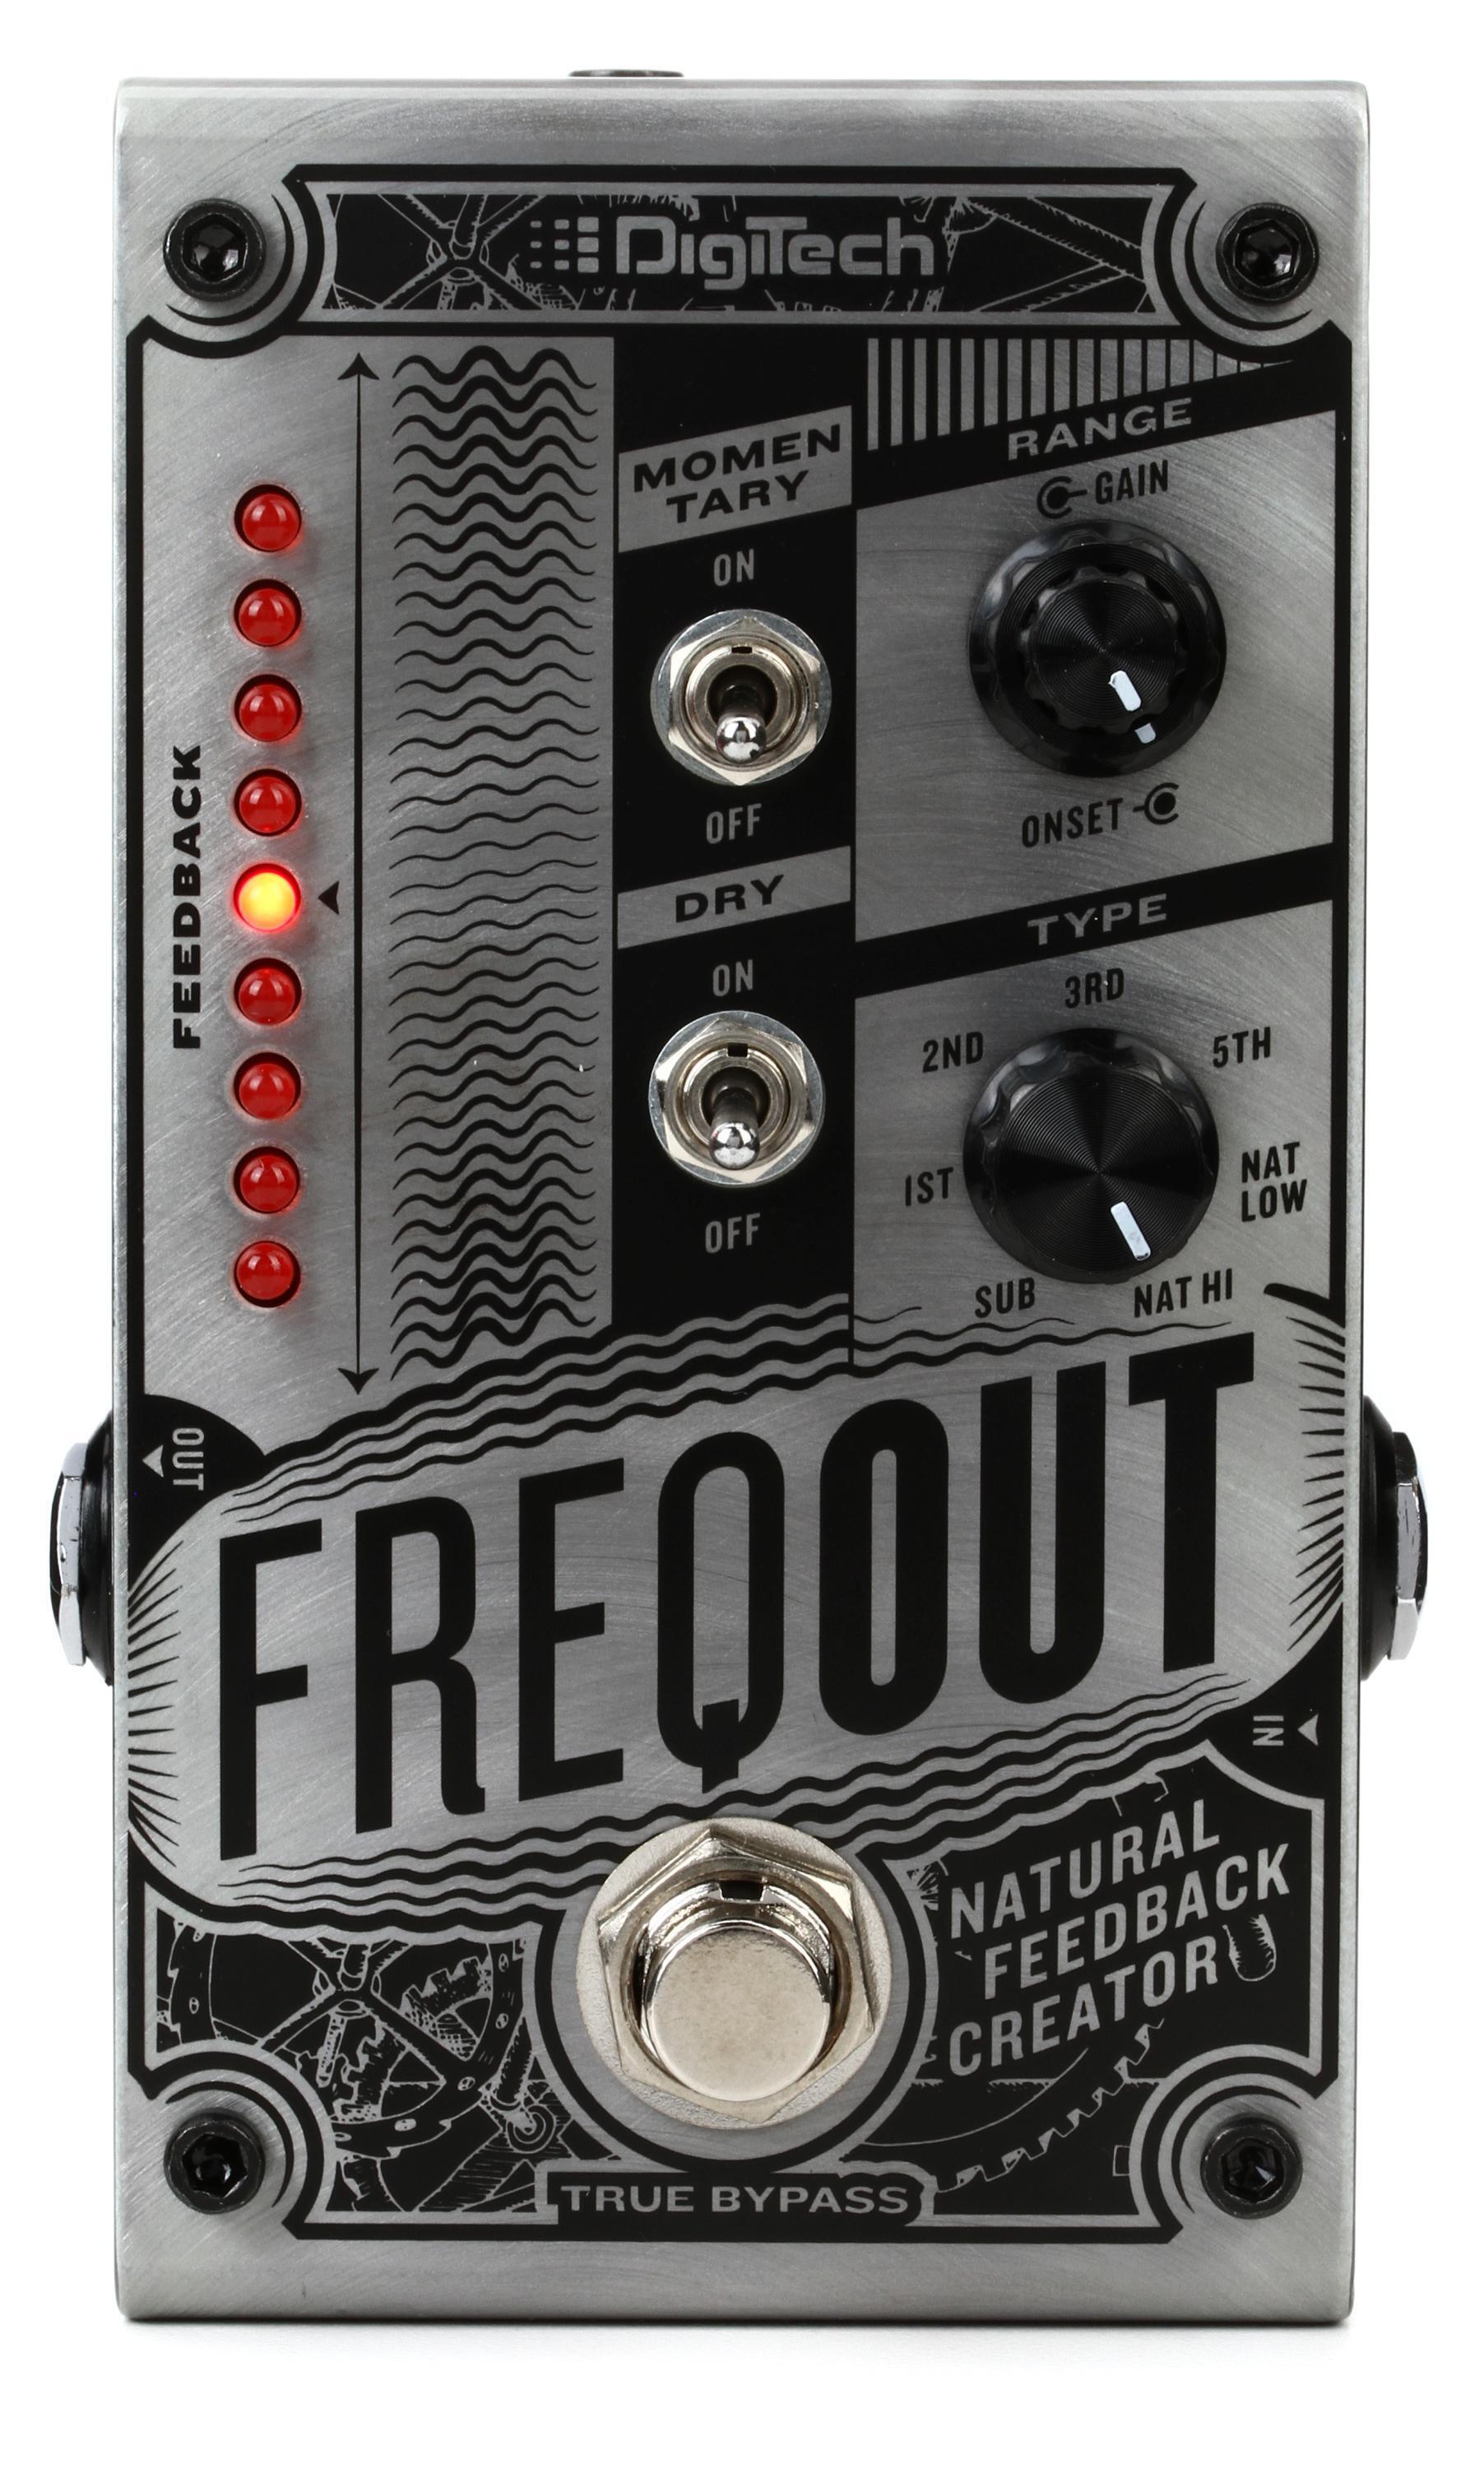 DigiTech FreqOut Natural Feedback Creation Pedal | Sweetwater